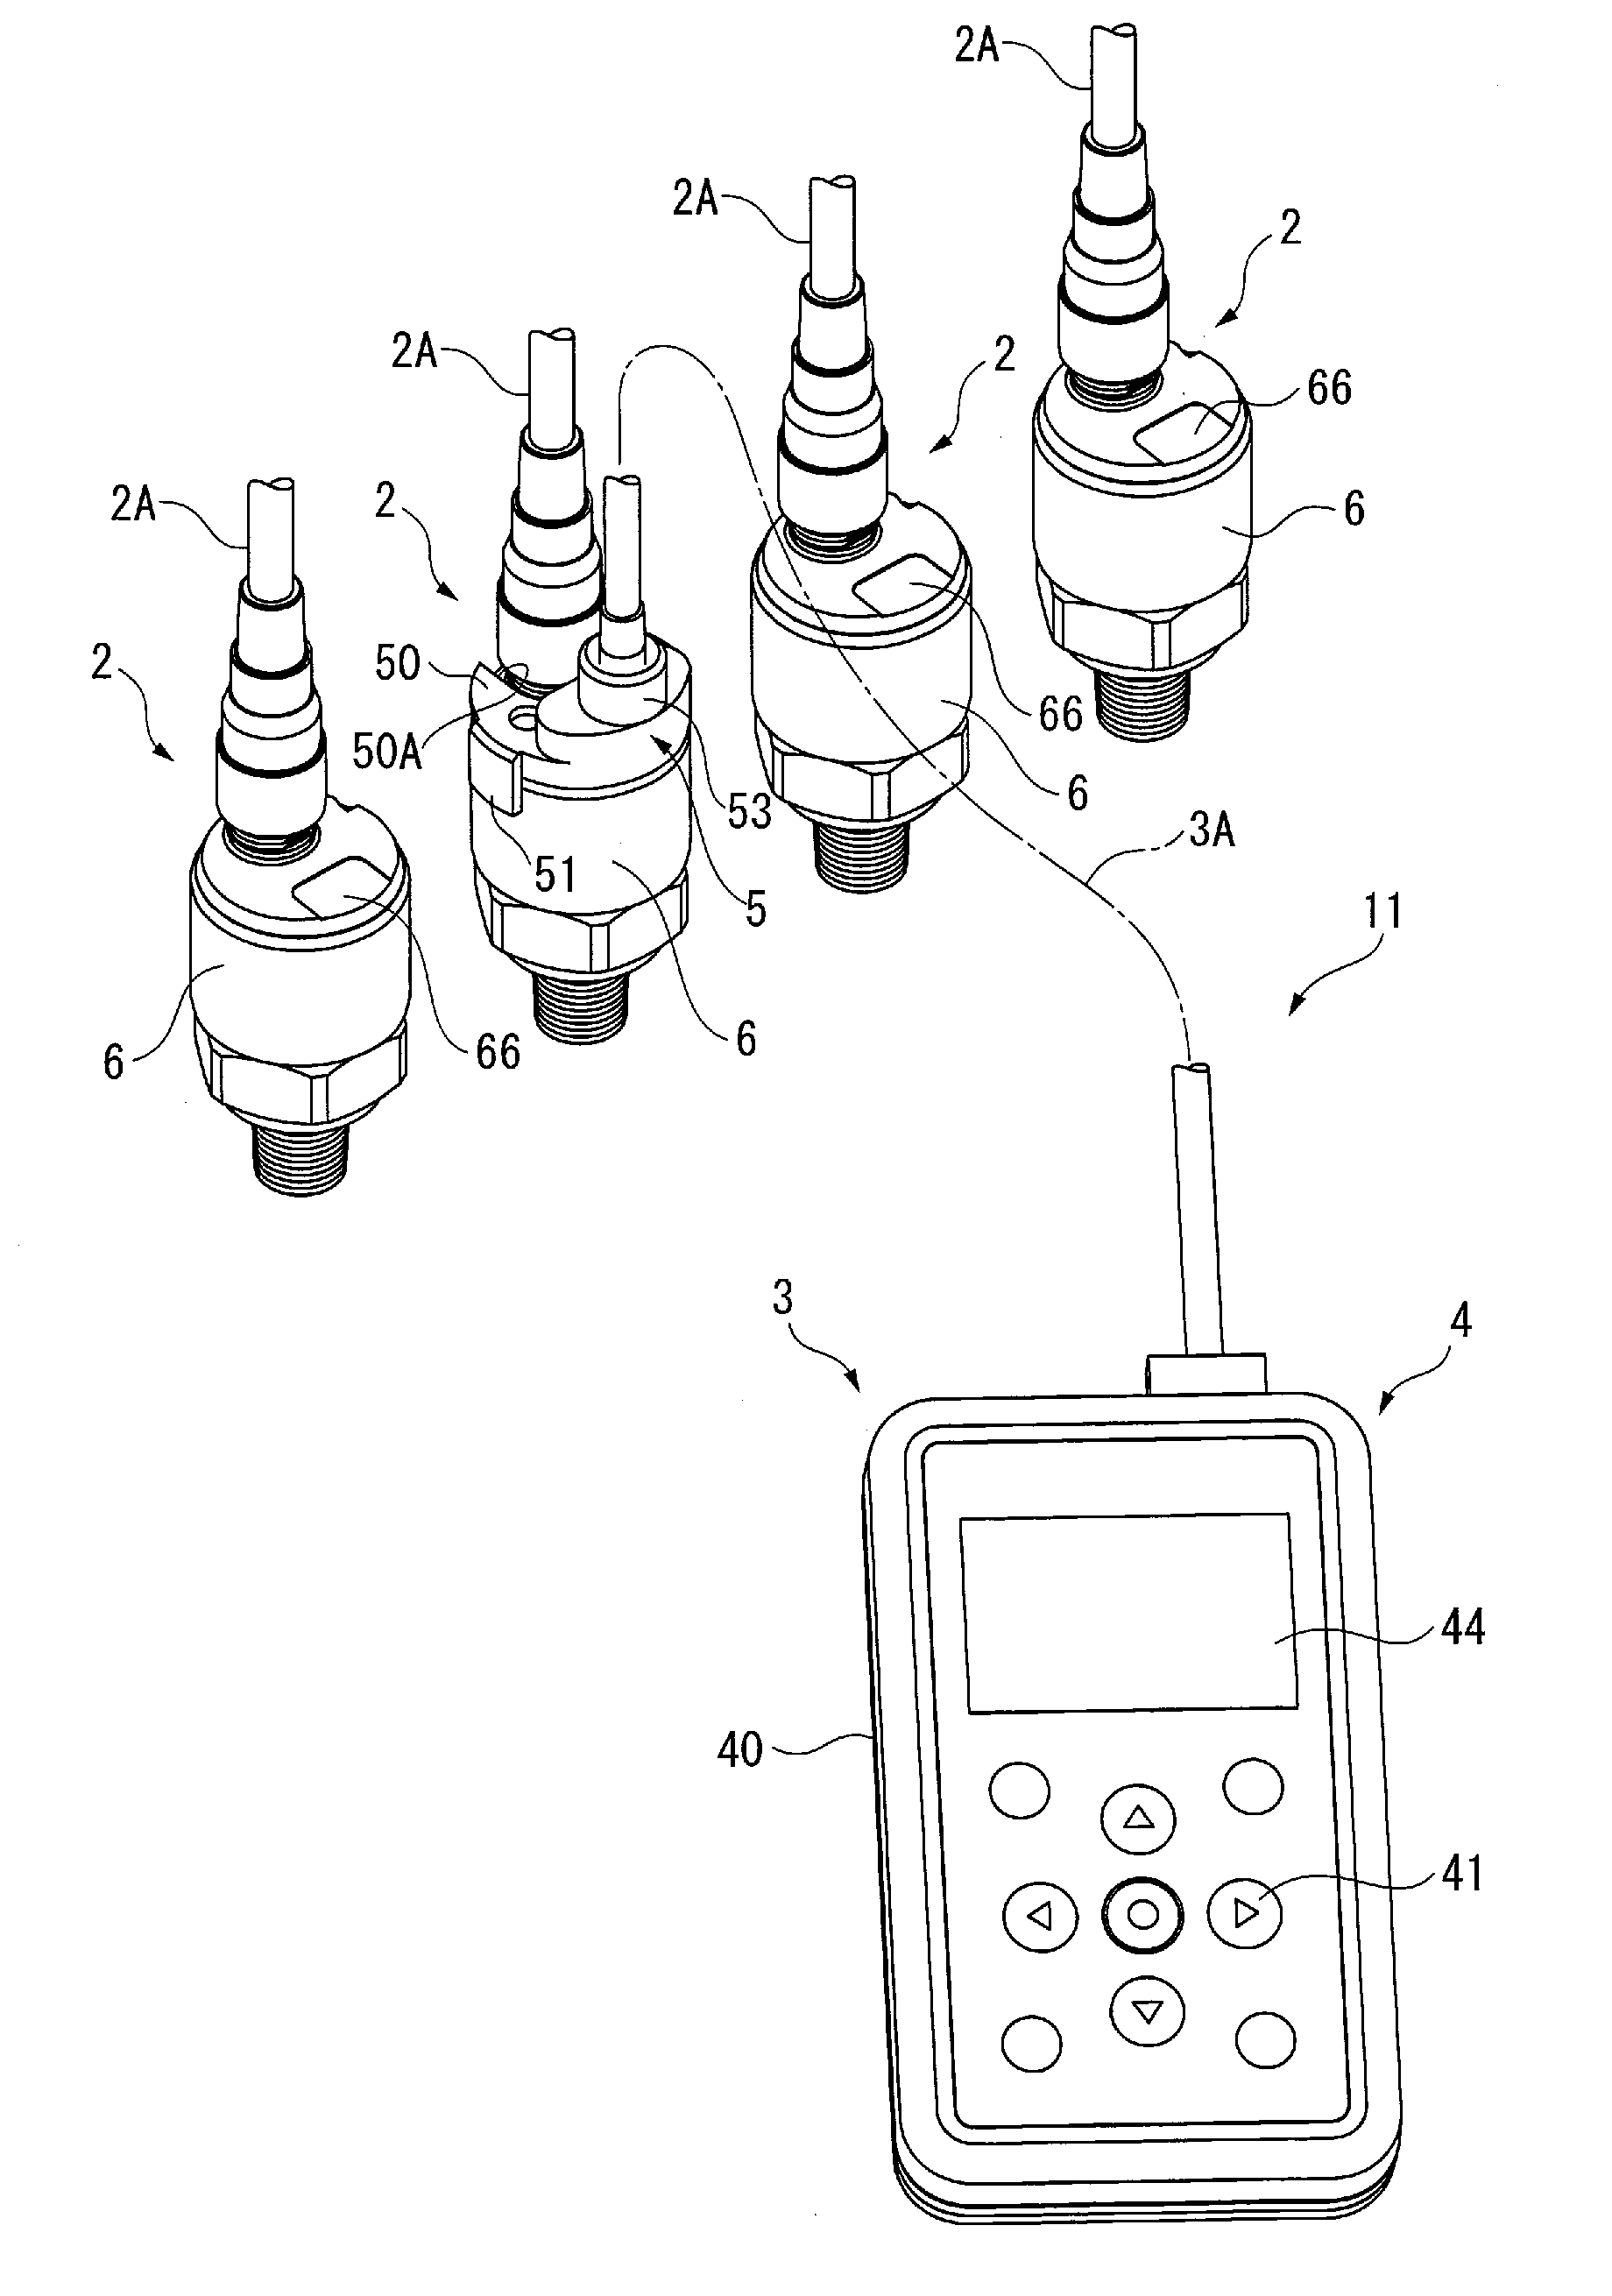 Physical quantity measuring device